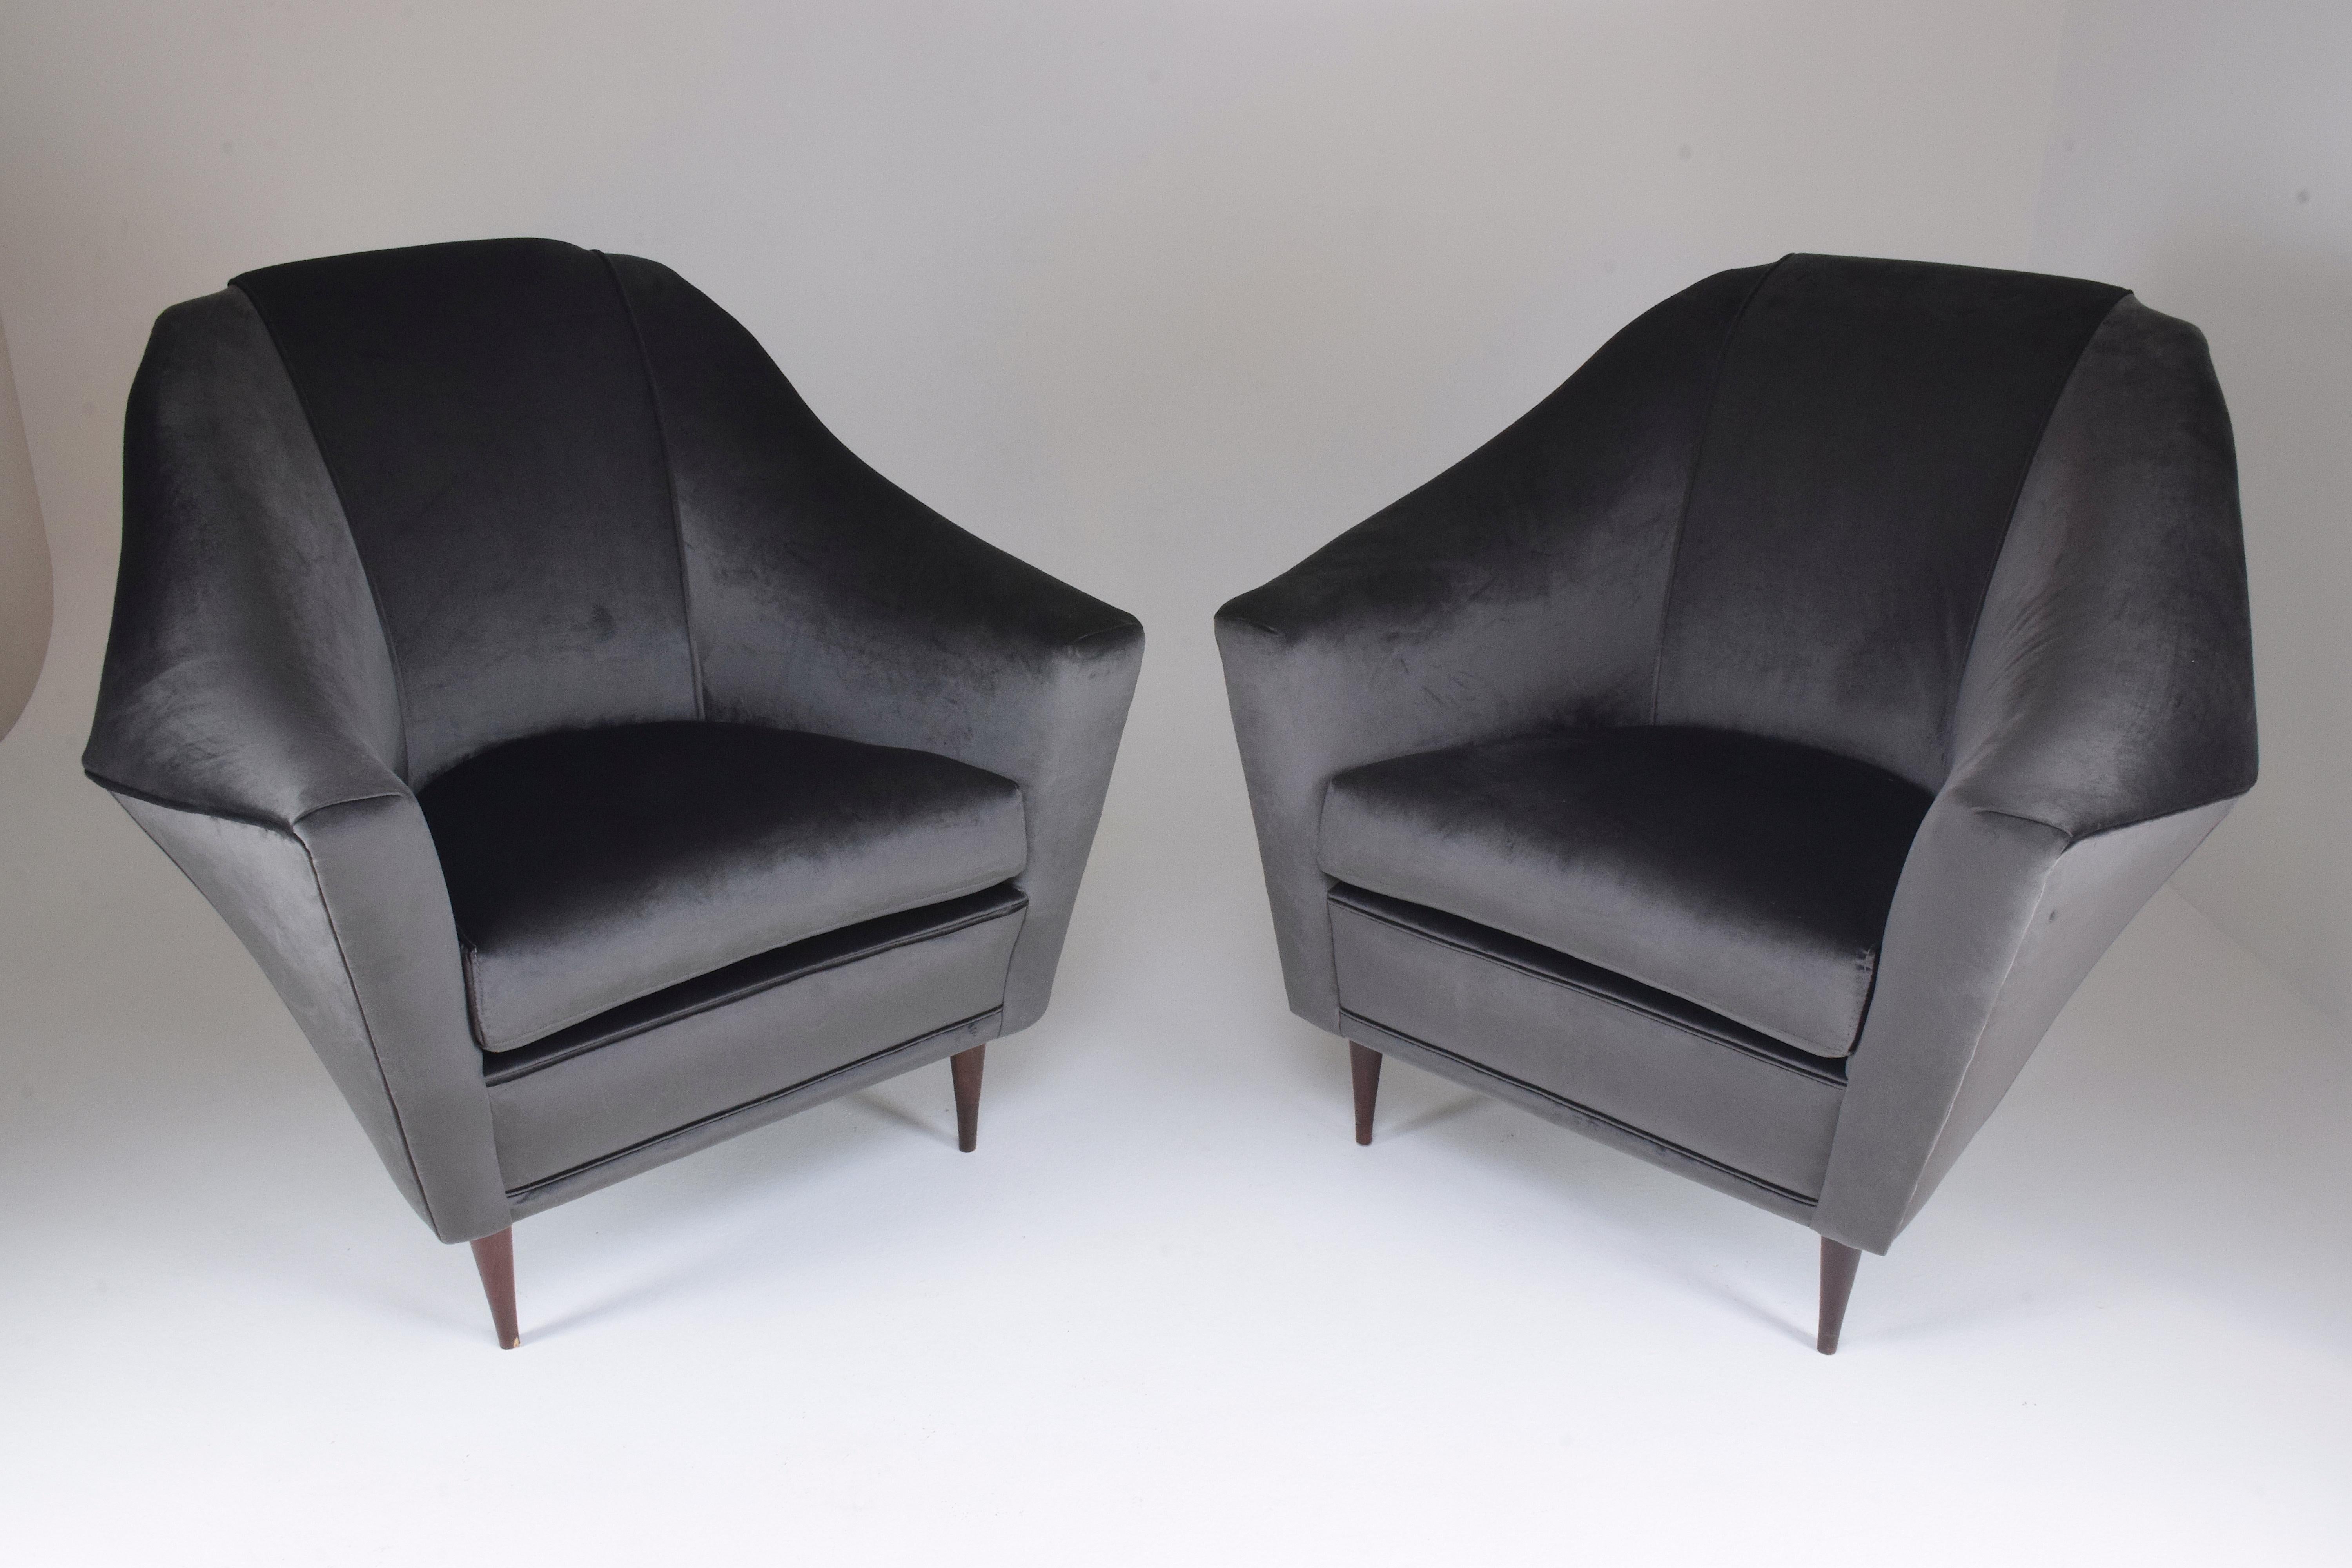 A rare pair of two Italian midcentury collectible armchairs or lounge chairs designed by Ico and Luisa Parisi for Ariberto Colombo at the beginning of the 1950s. The angular shape of the backrest and cone-shaped wooden feet are an Italian design